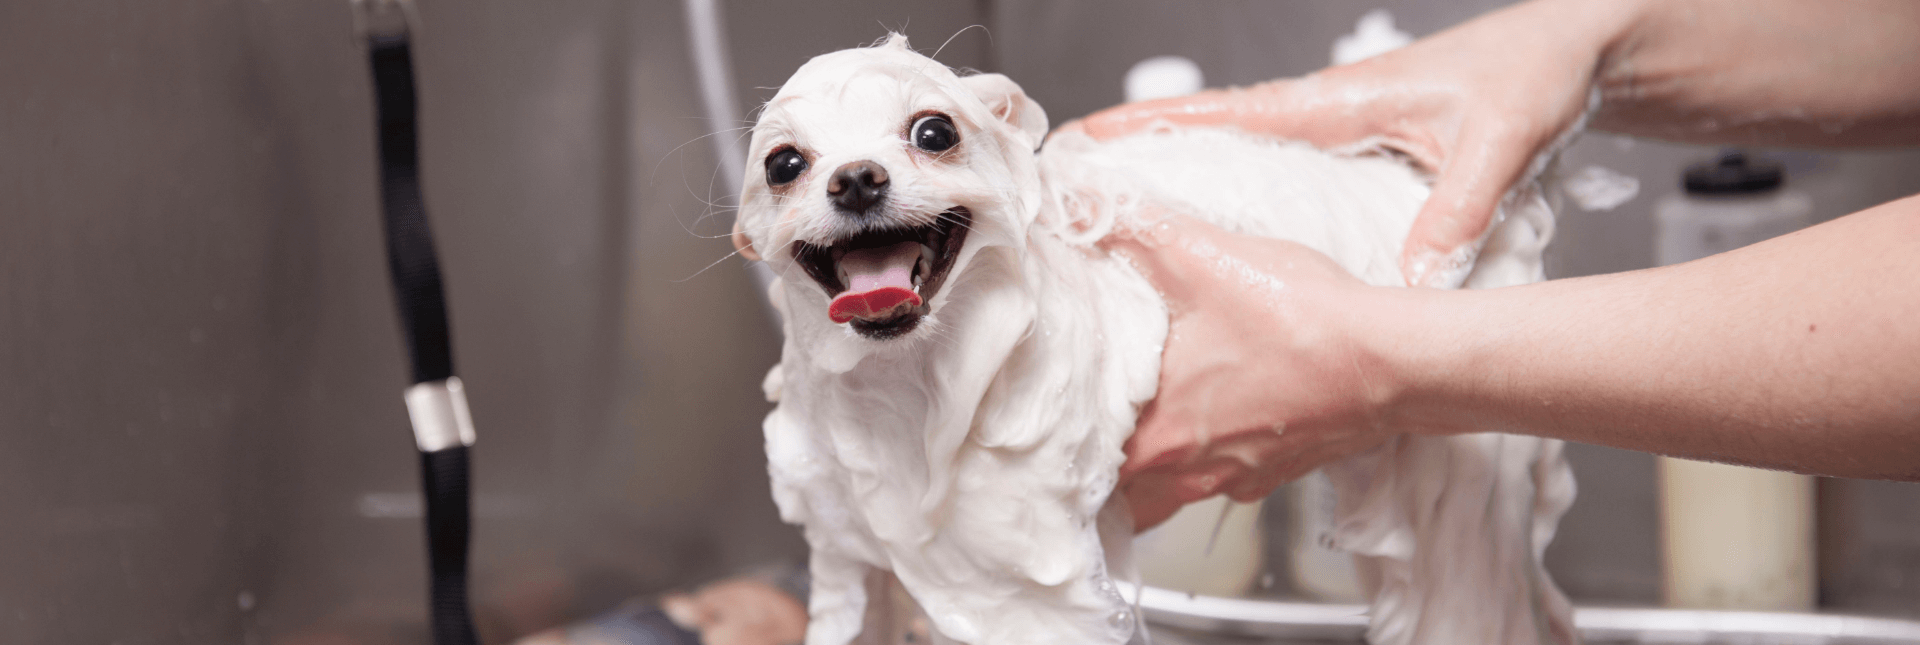 adorable little dog being washed